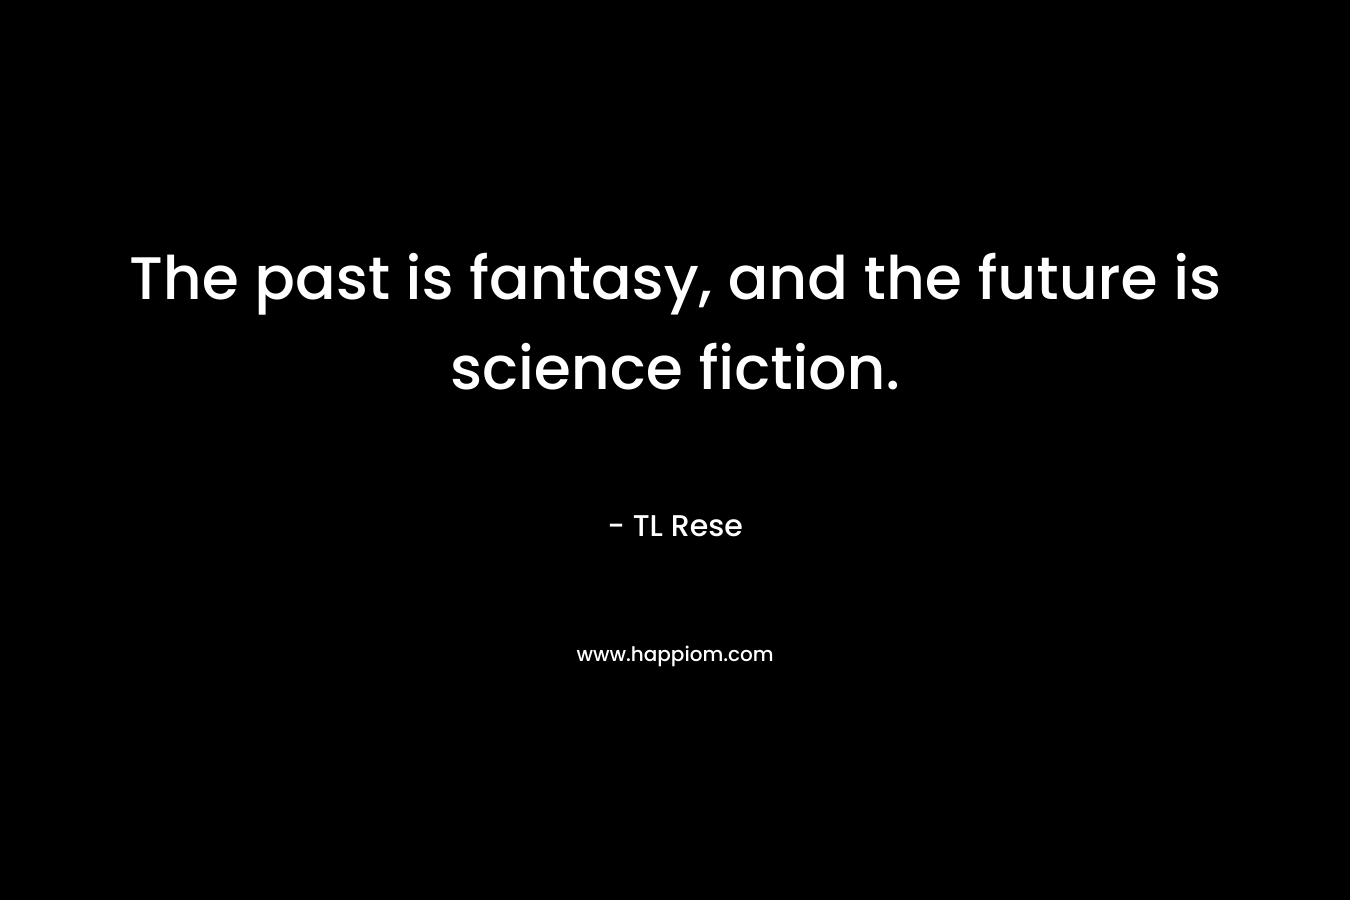 The past is fantasy, and the future is science fiction.